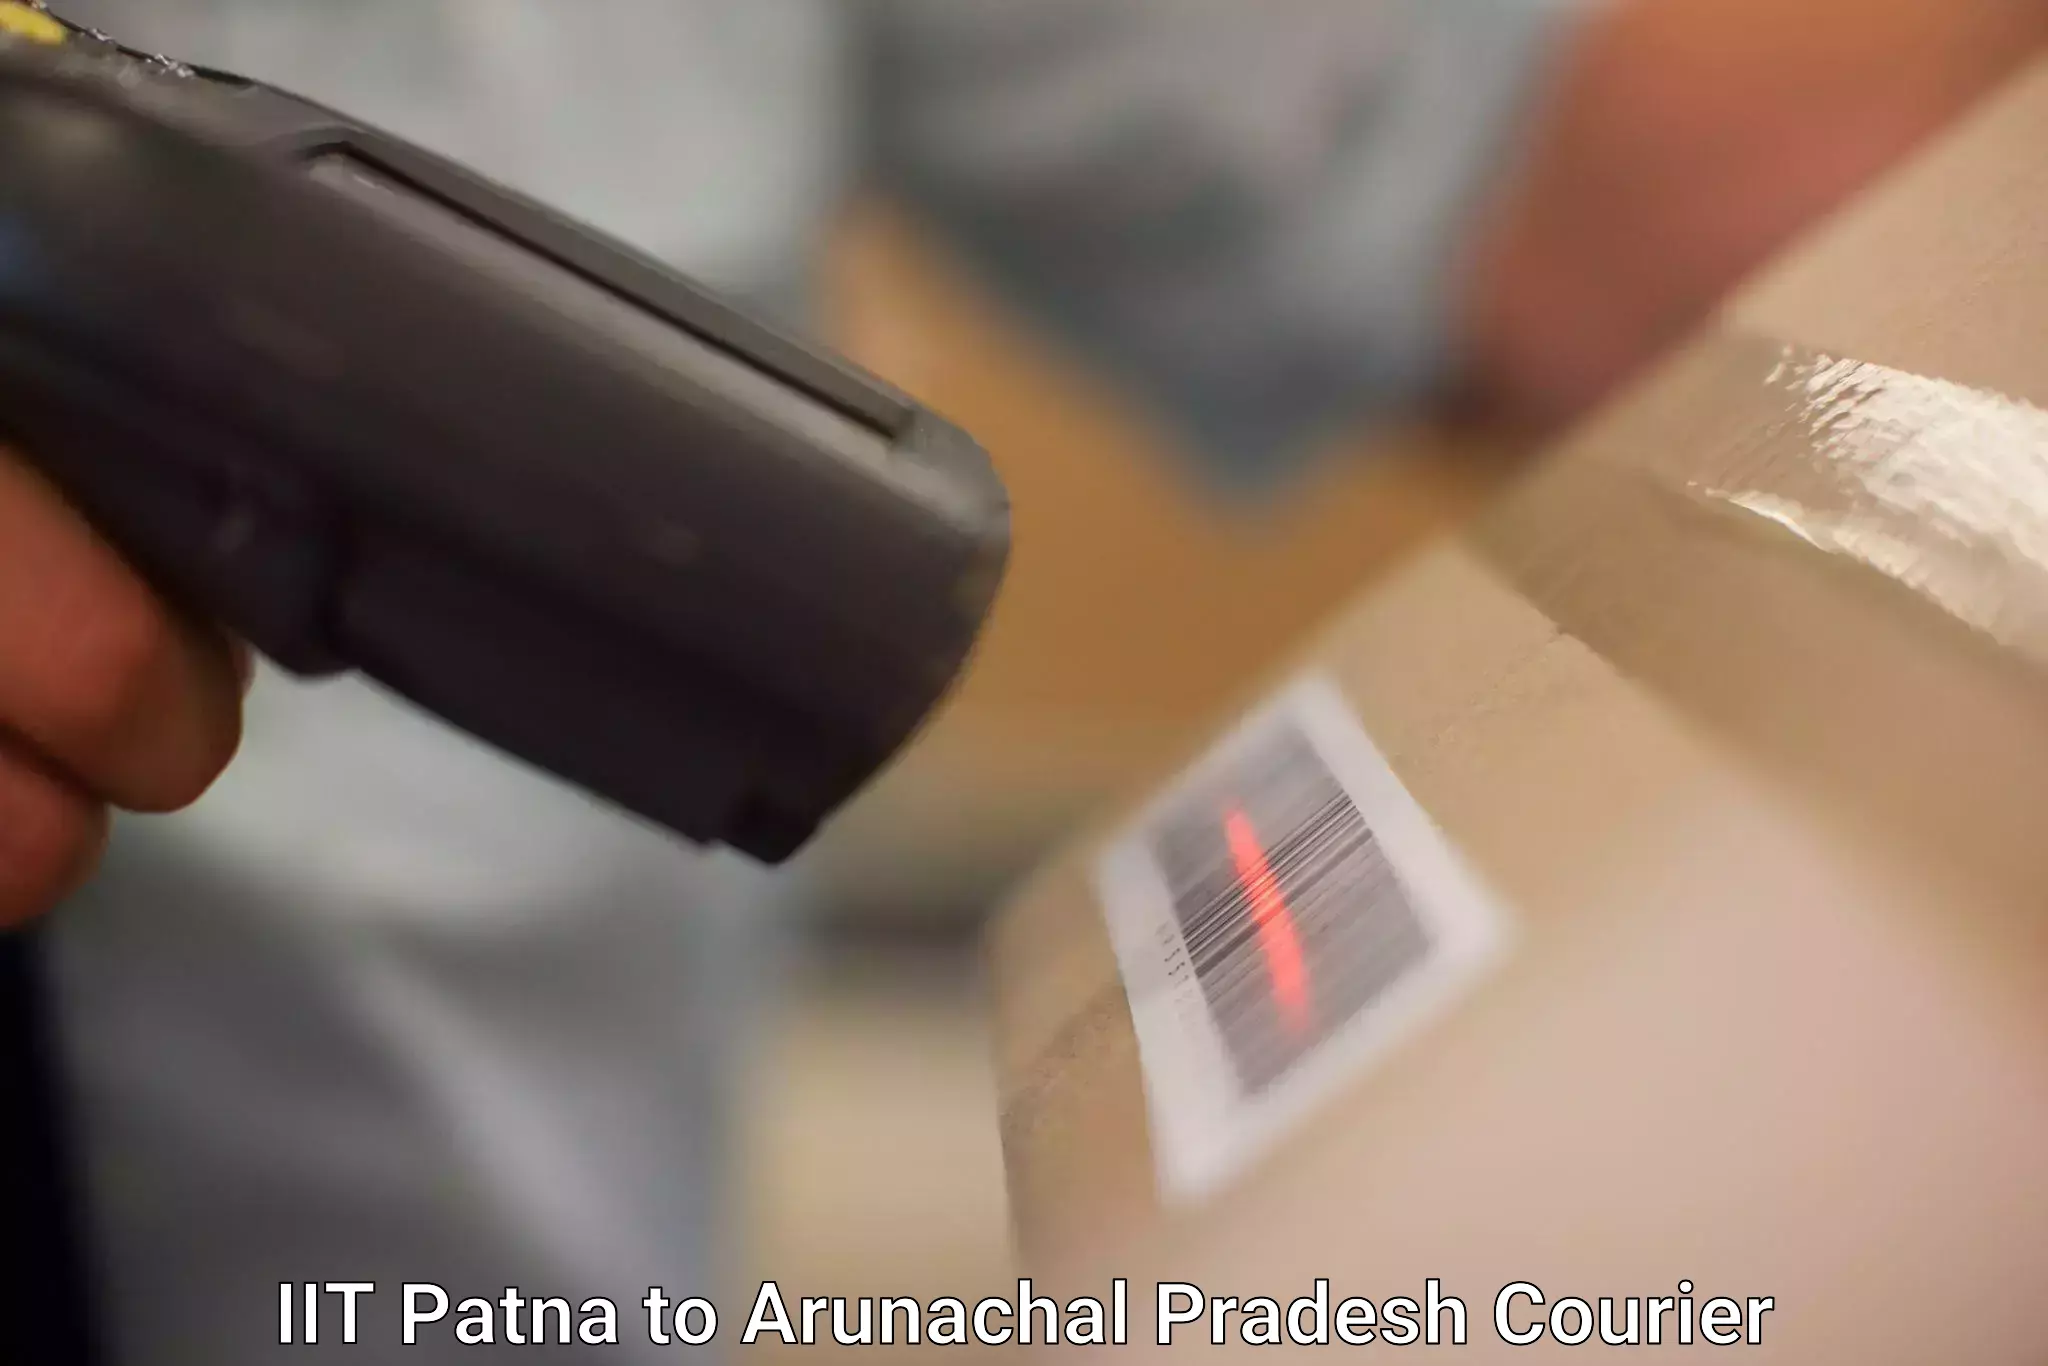 State-of-the-art courier technology IIT Patna to East Kameng